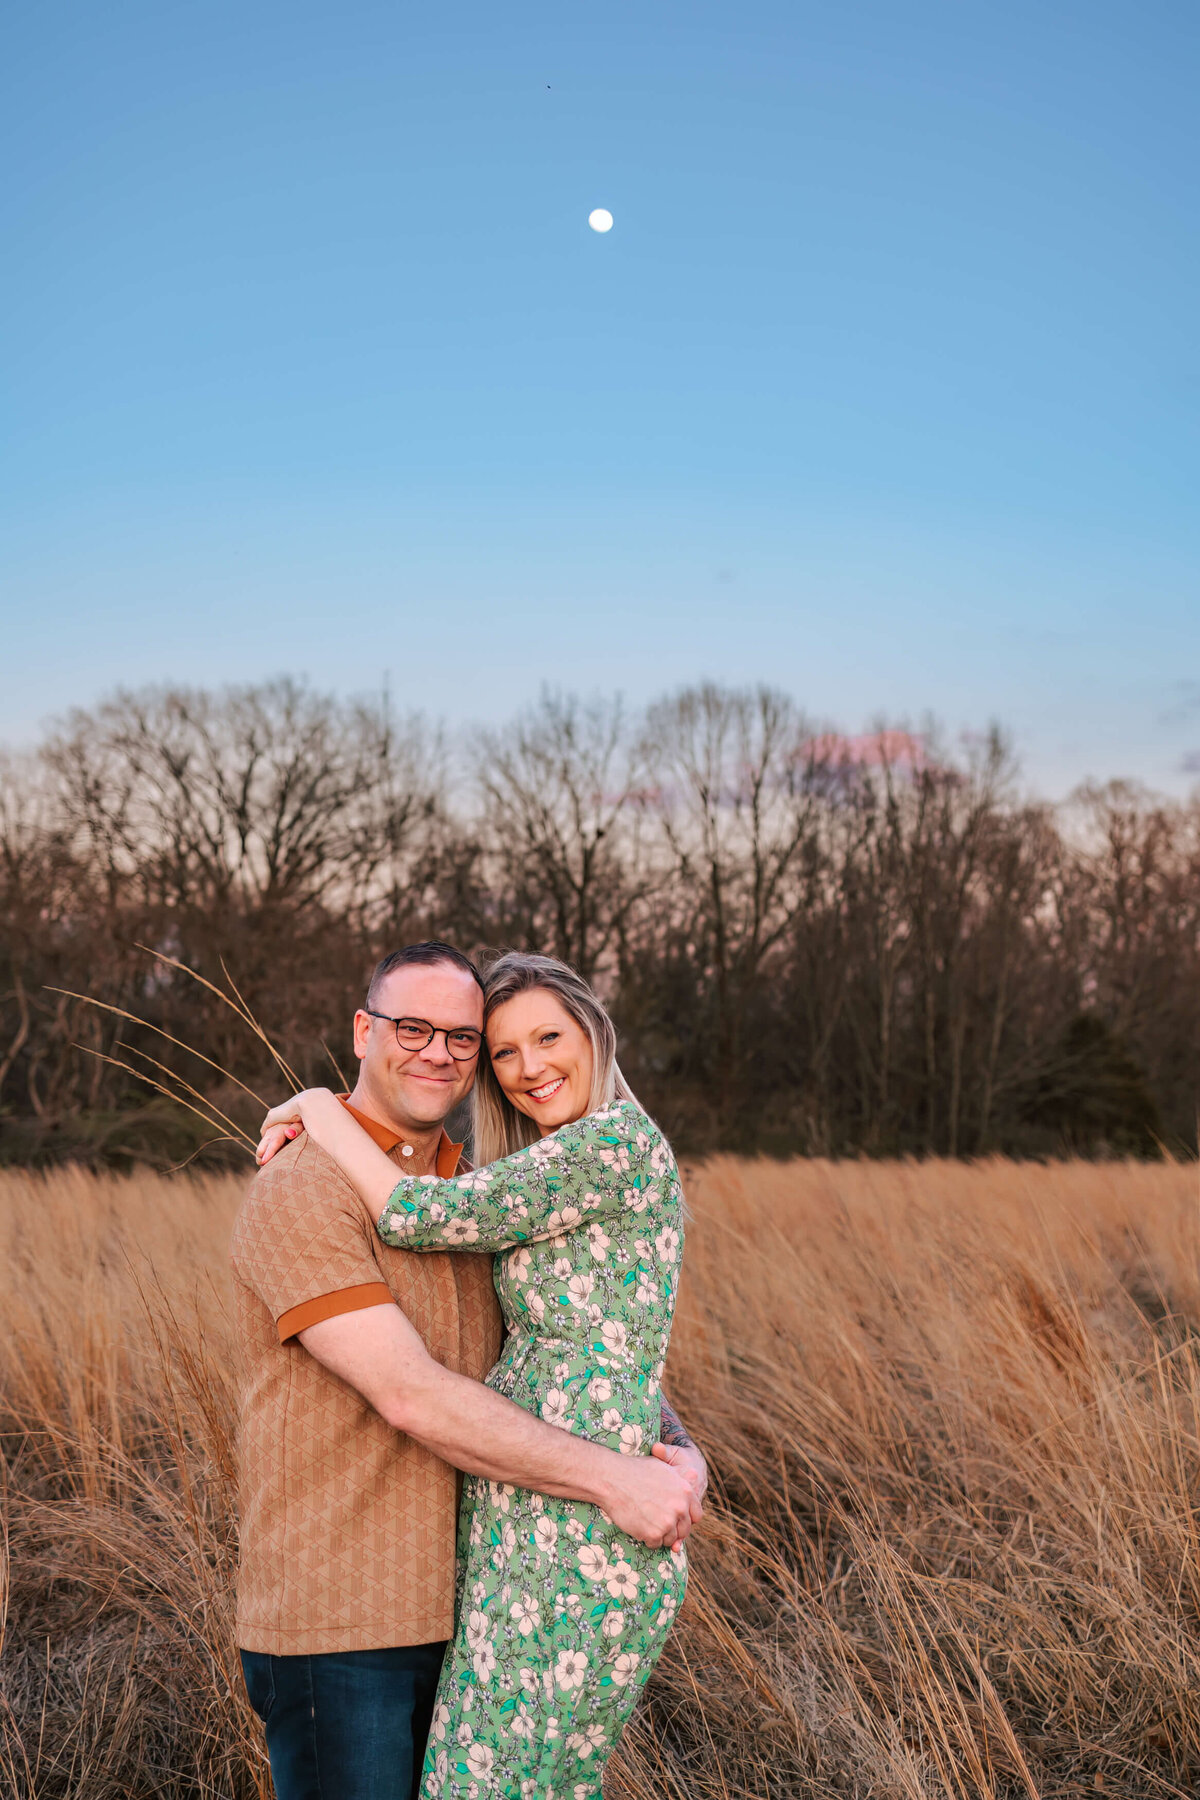 A man and woman are standing together in a field of tall grass  with their arms around each other smiling at the camera. The moon is showing in the blue sky